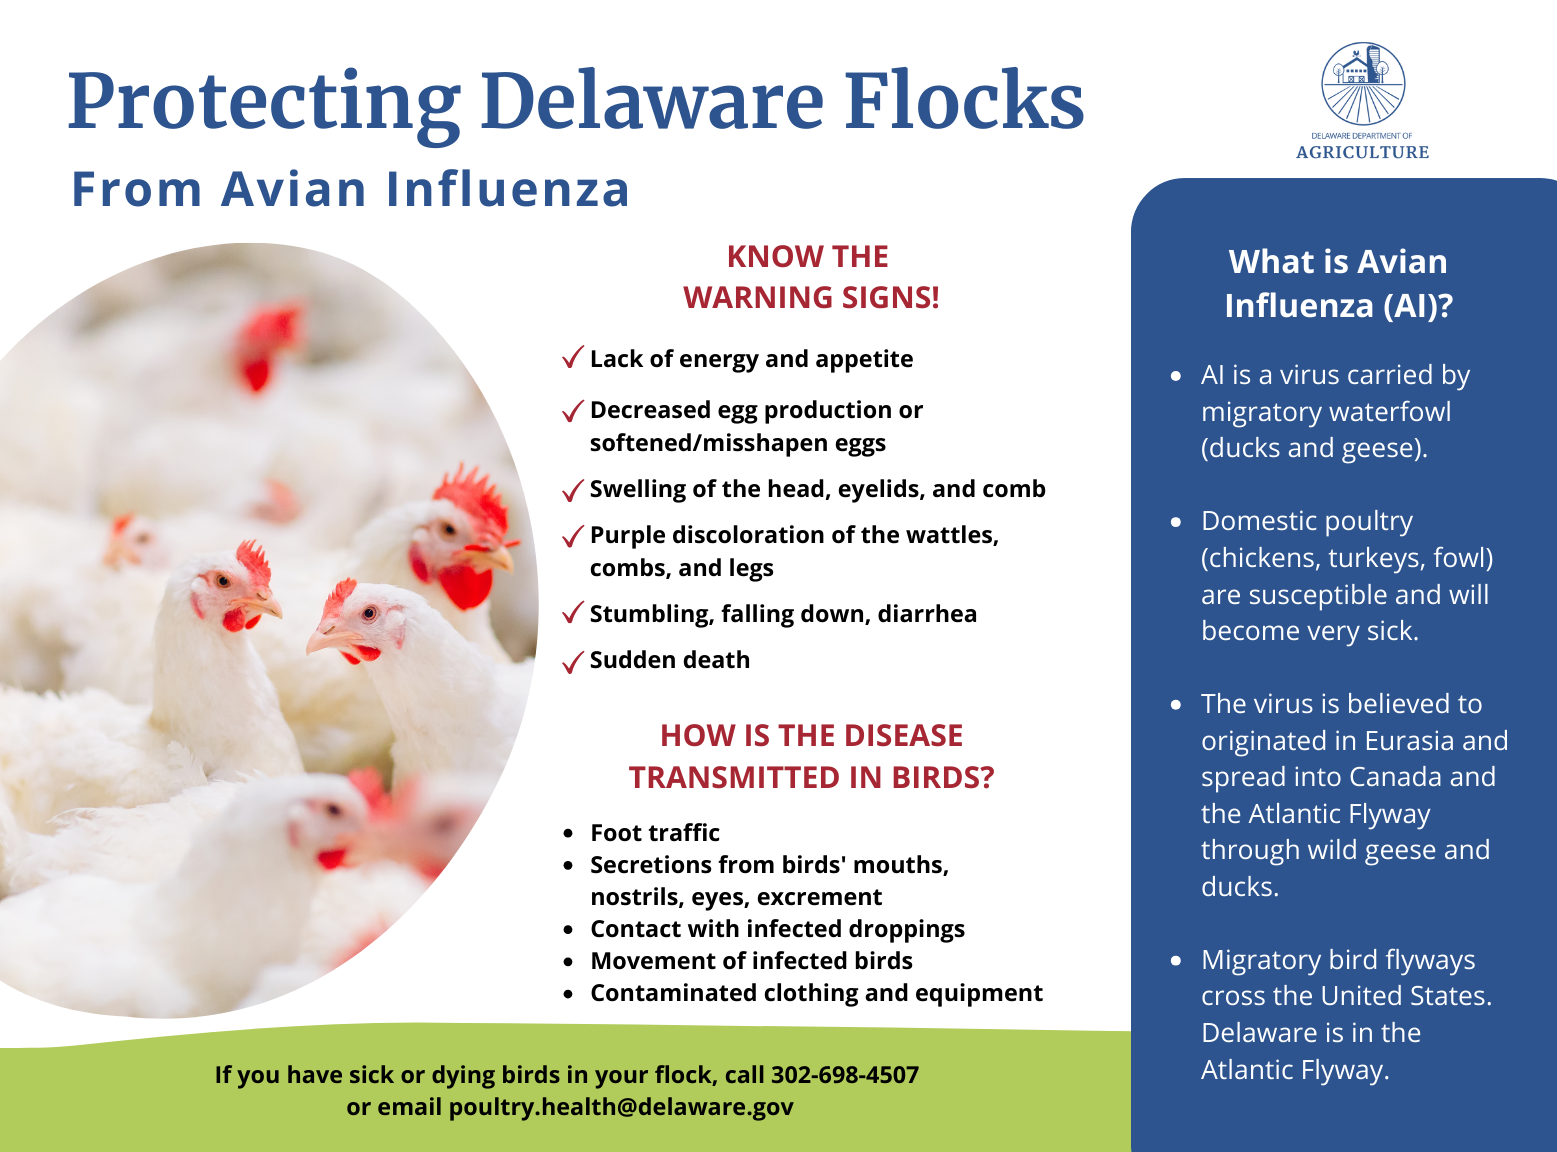 Infographic with chickens outlining the signs and symptoms of avian influenza, what the virus is, and who to call when you suspect your birds are sick. All information is shared in the press release.